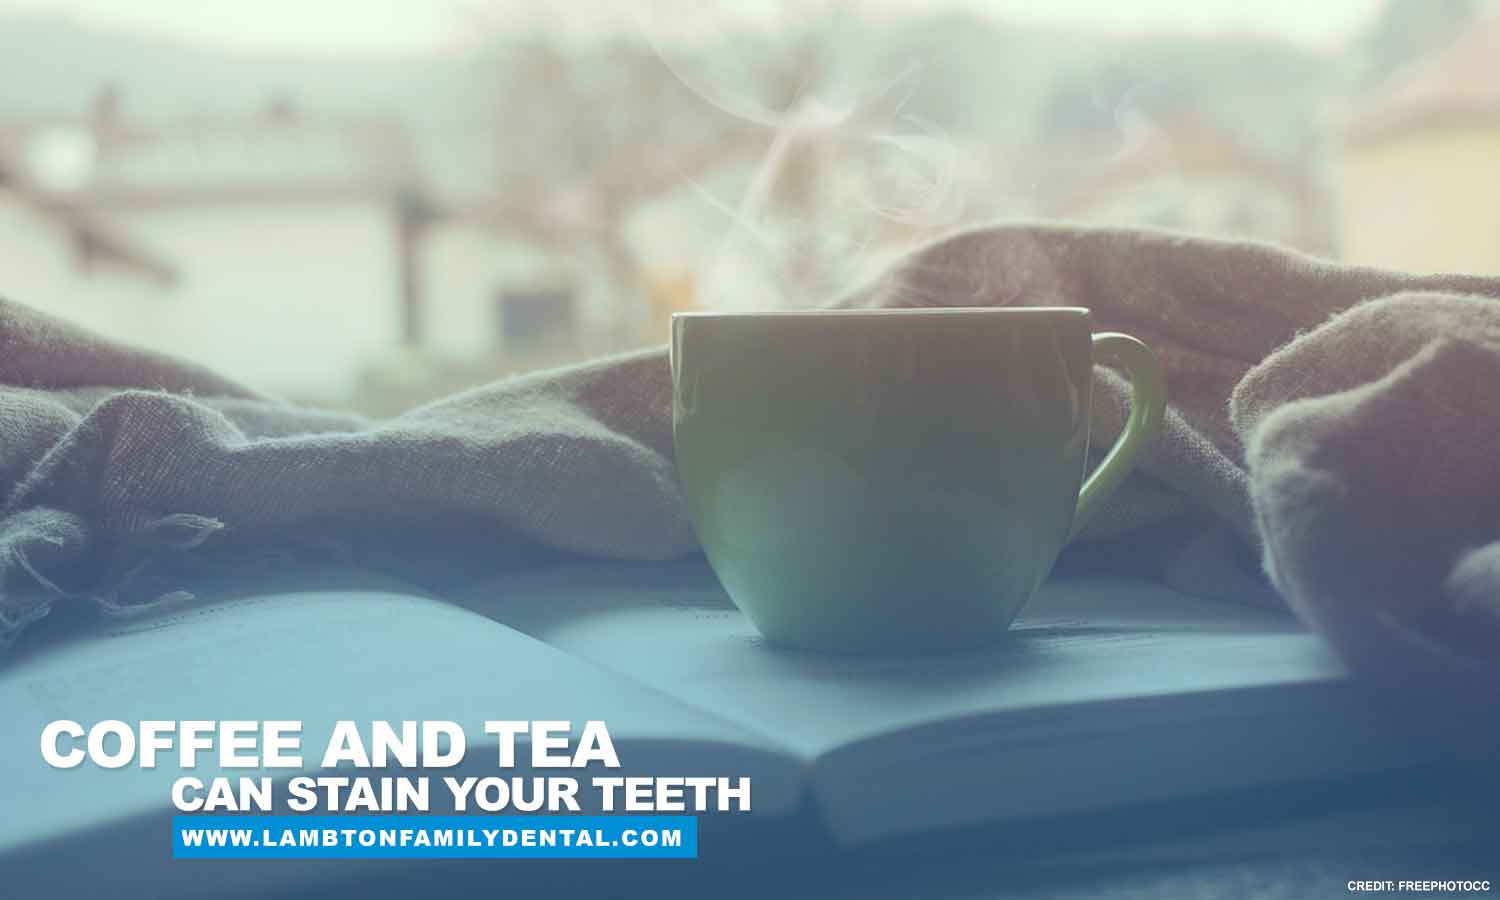 Coffee and tea can stain your teeth